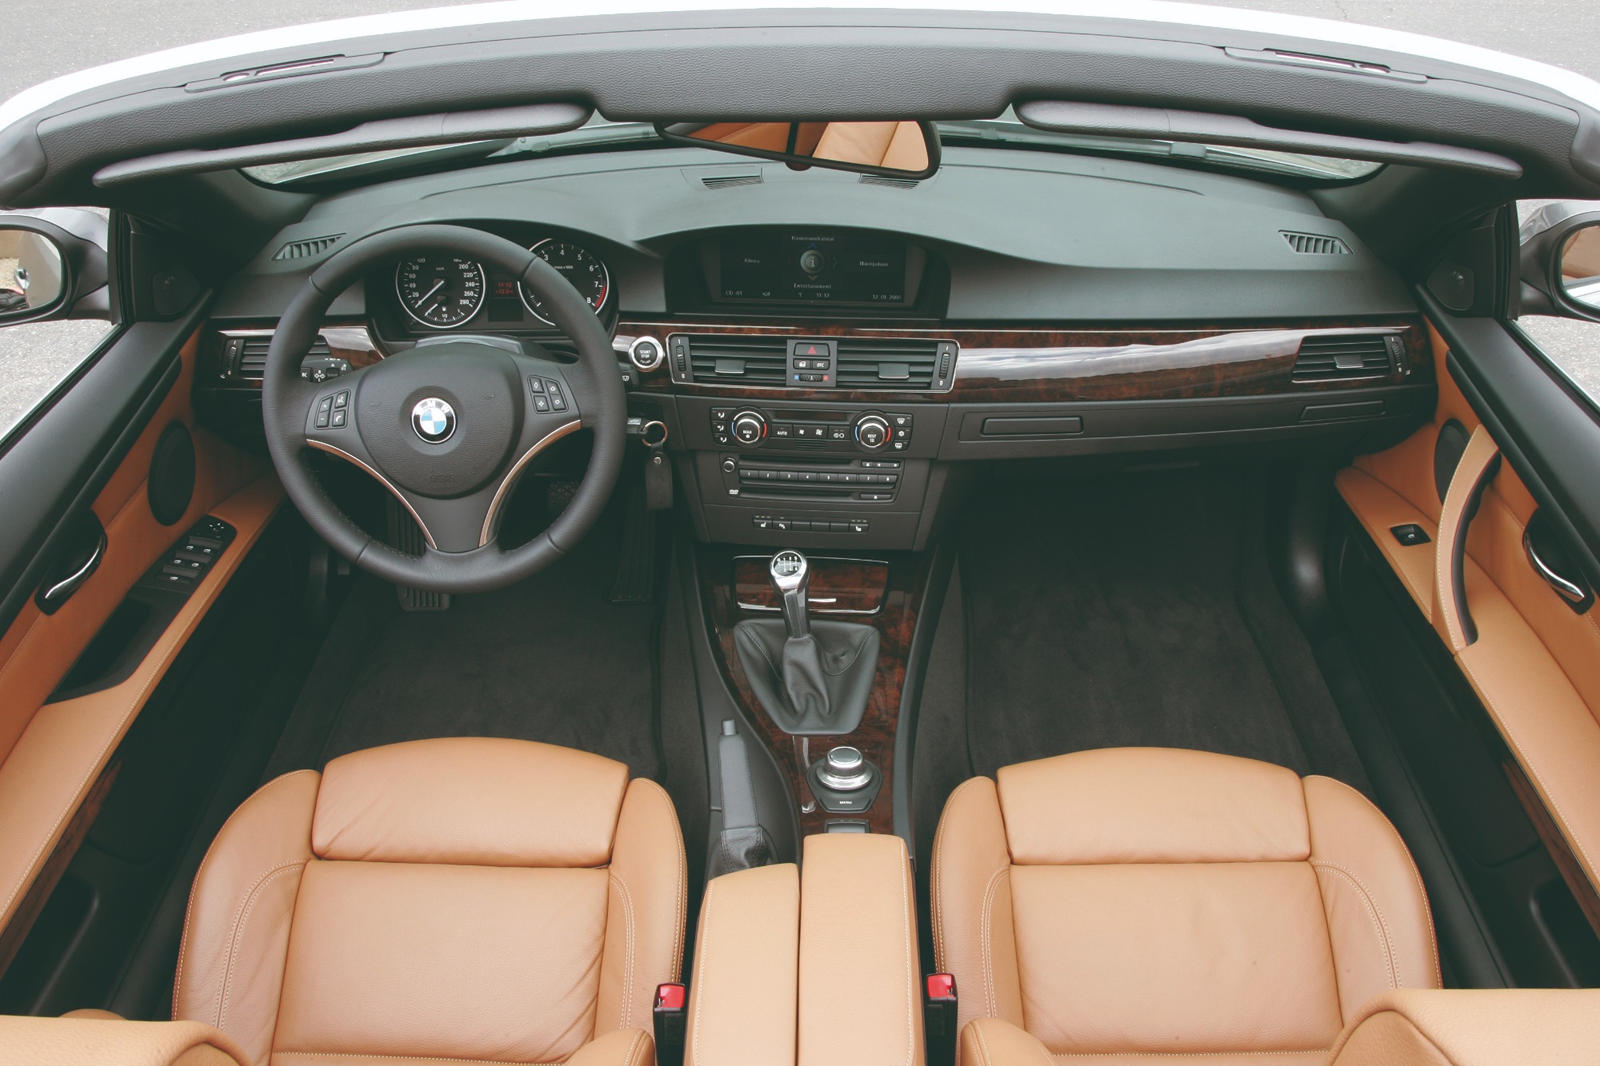 Feed on opener shave 2008 BMW 3 Series Convertible Interior Photos | CarBuzz